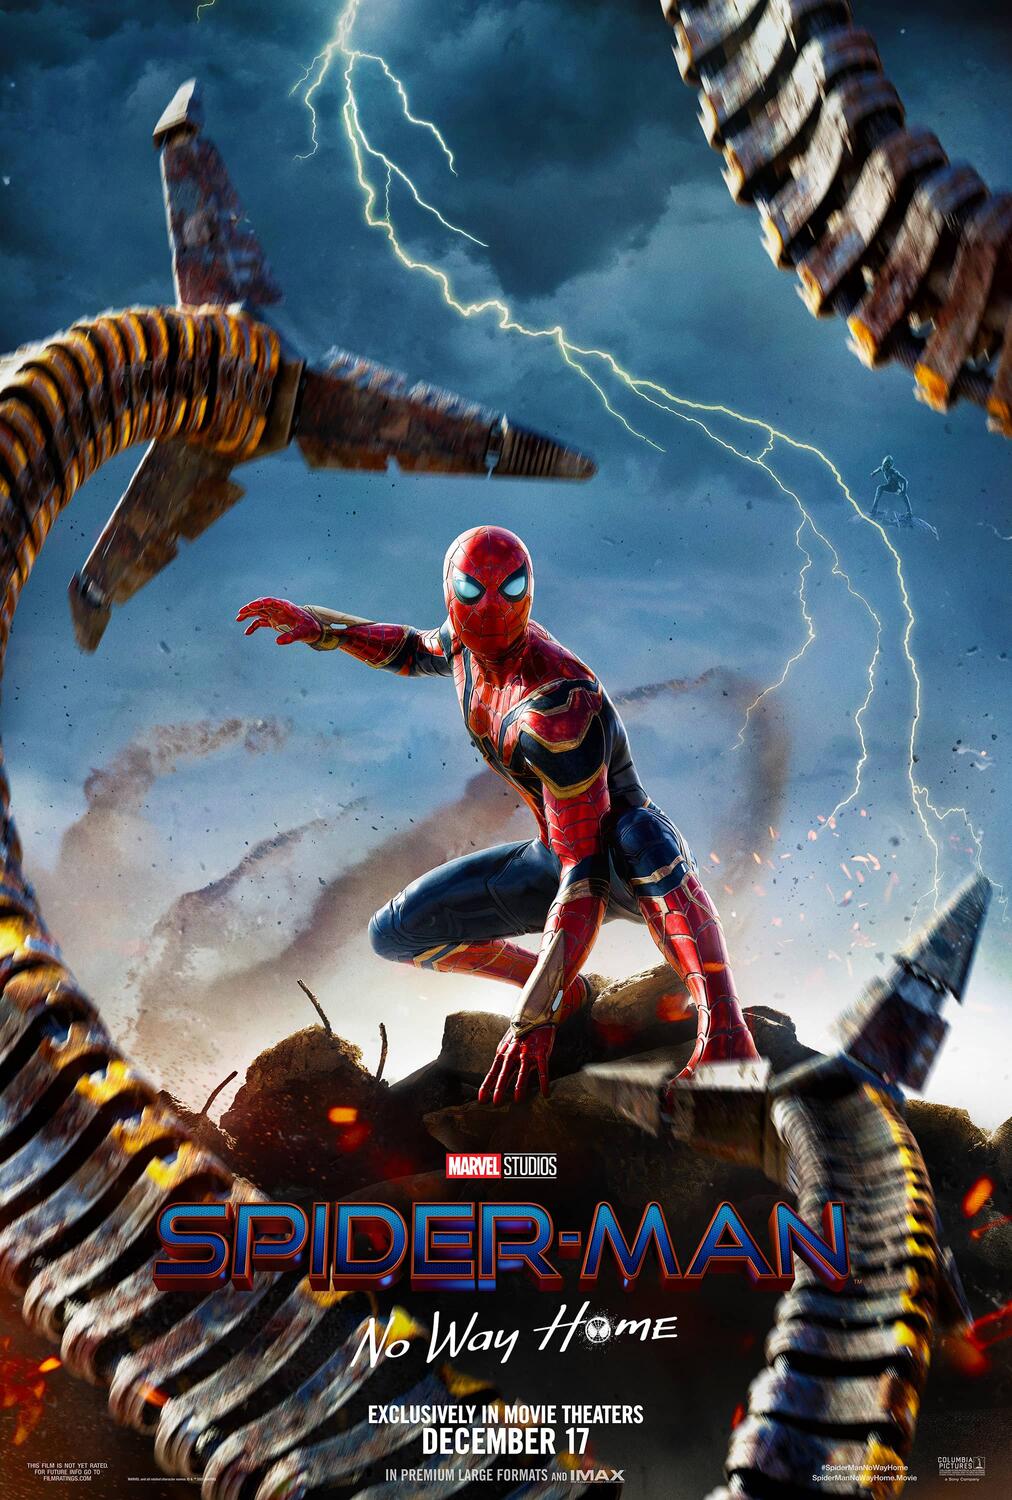 Spider-Man No Way Home” swings into box office success